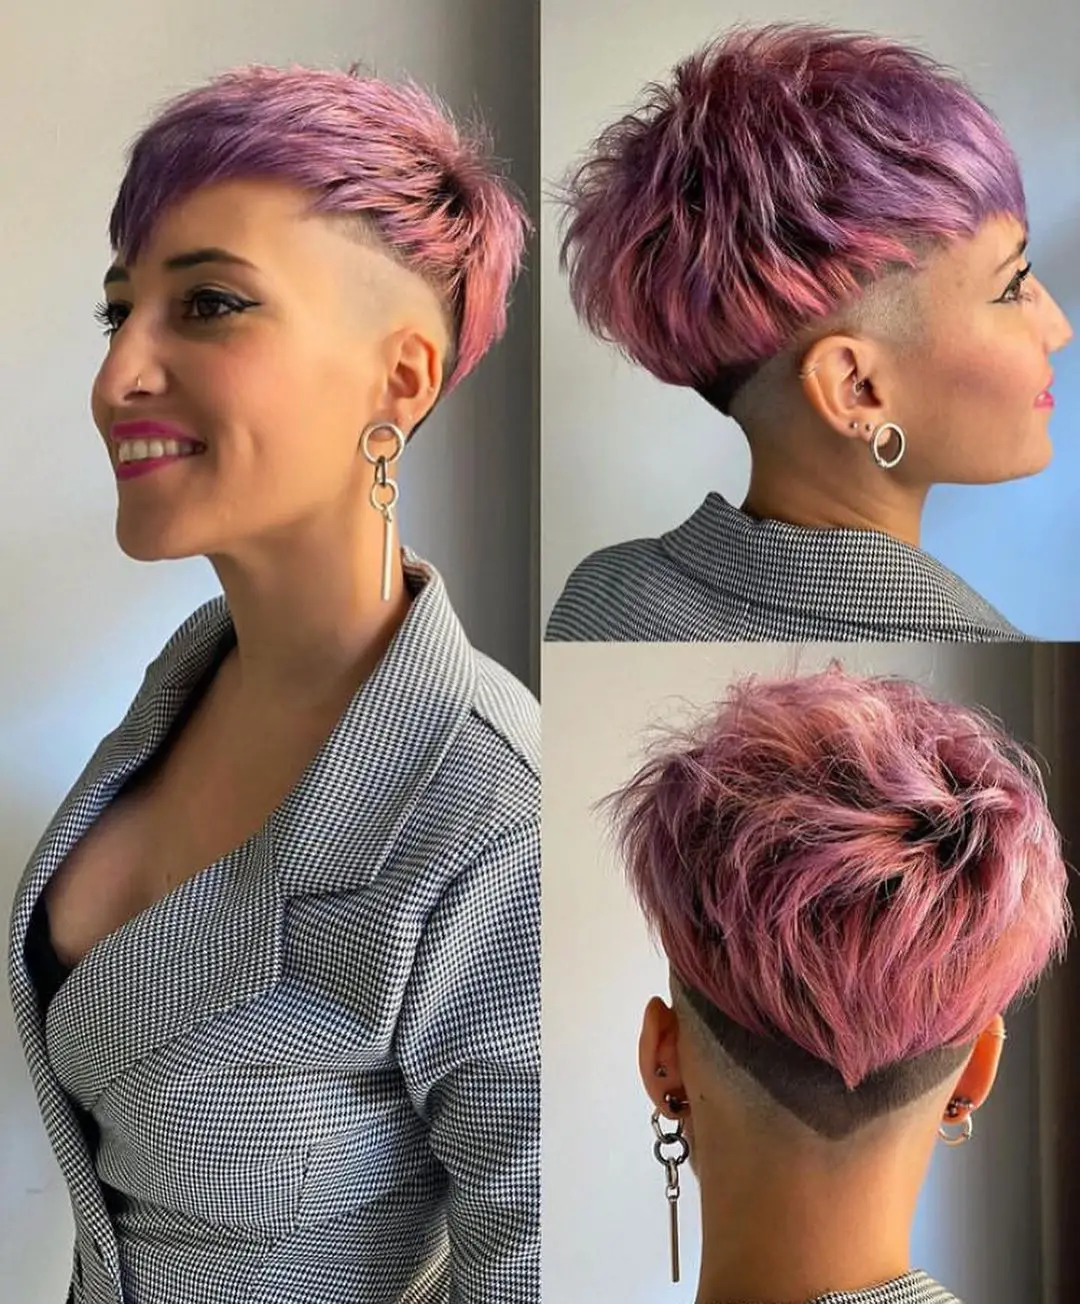 55-best-tapered-haircuts-and-fades-for-women Funky Pixie Cut with Fade Variation